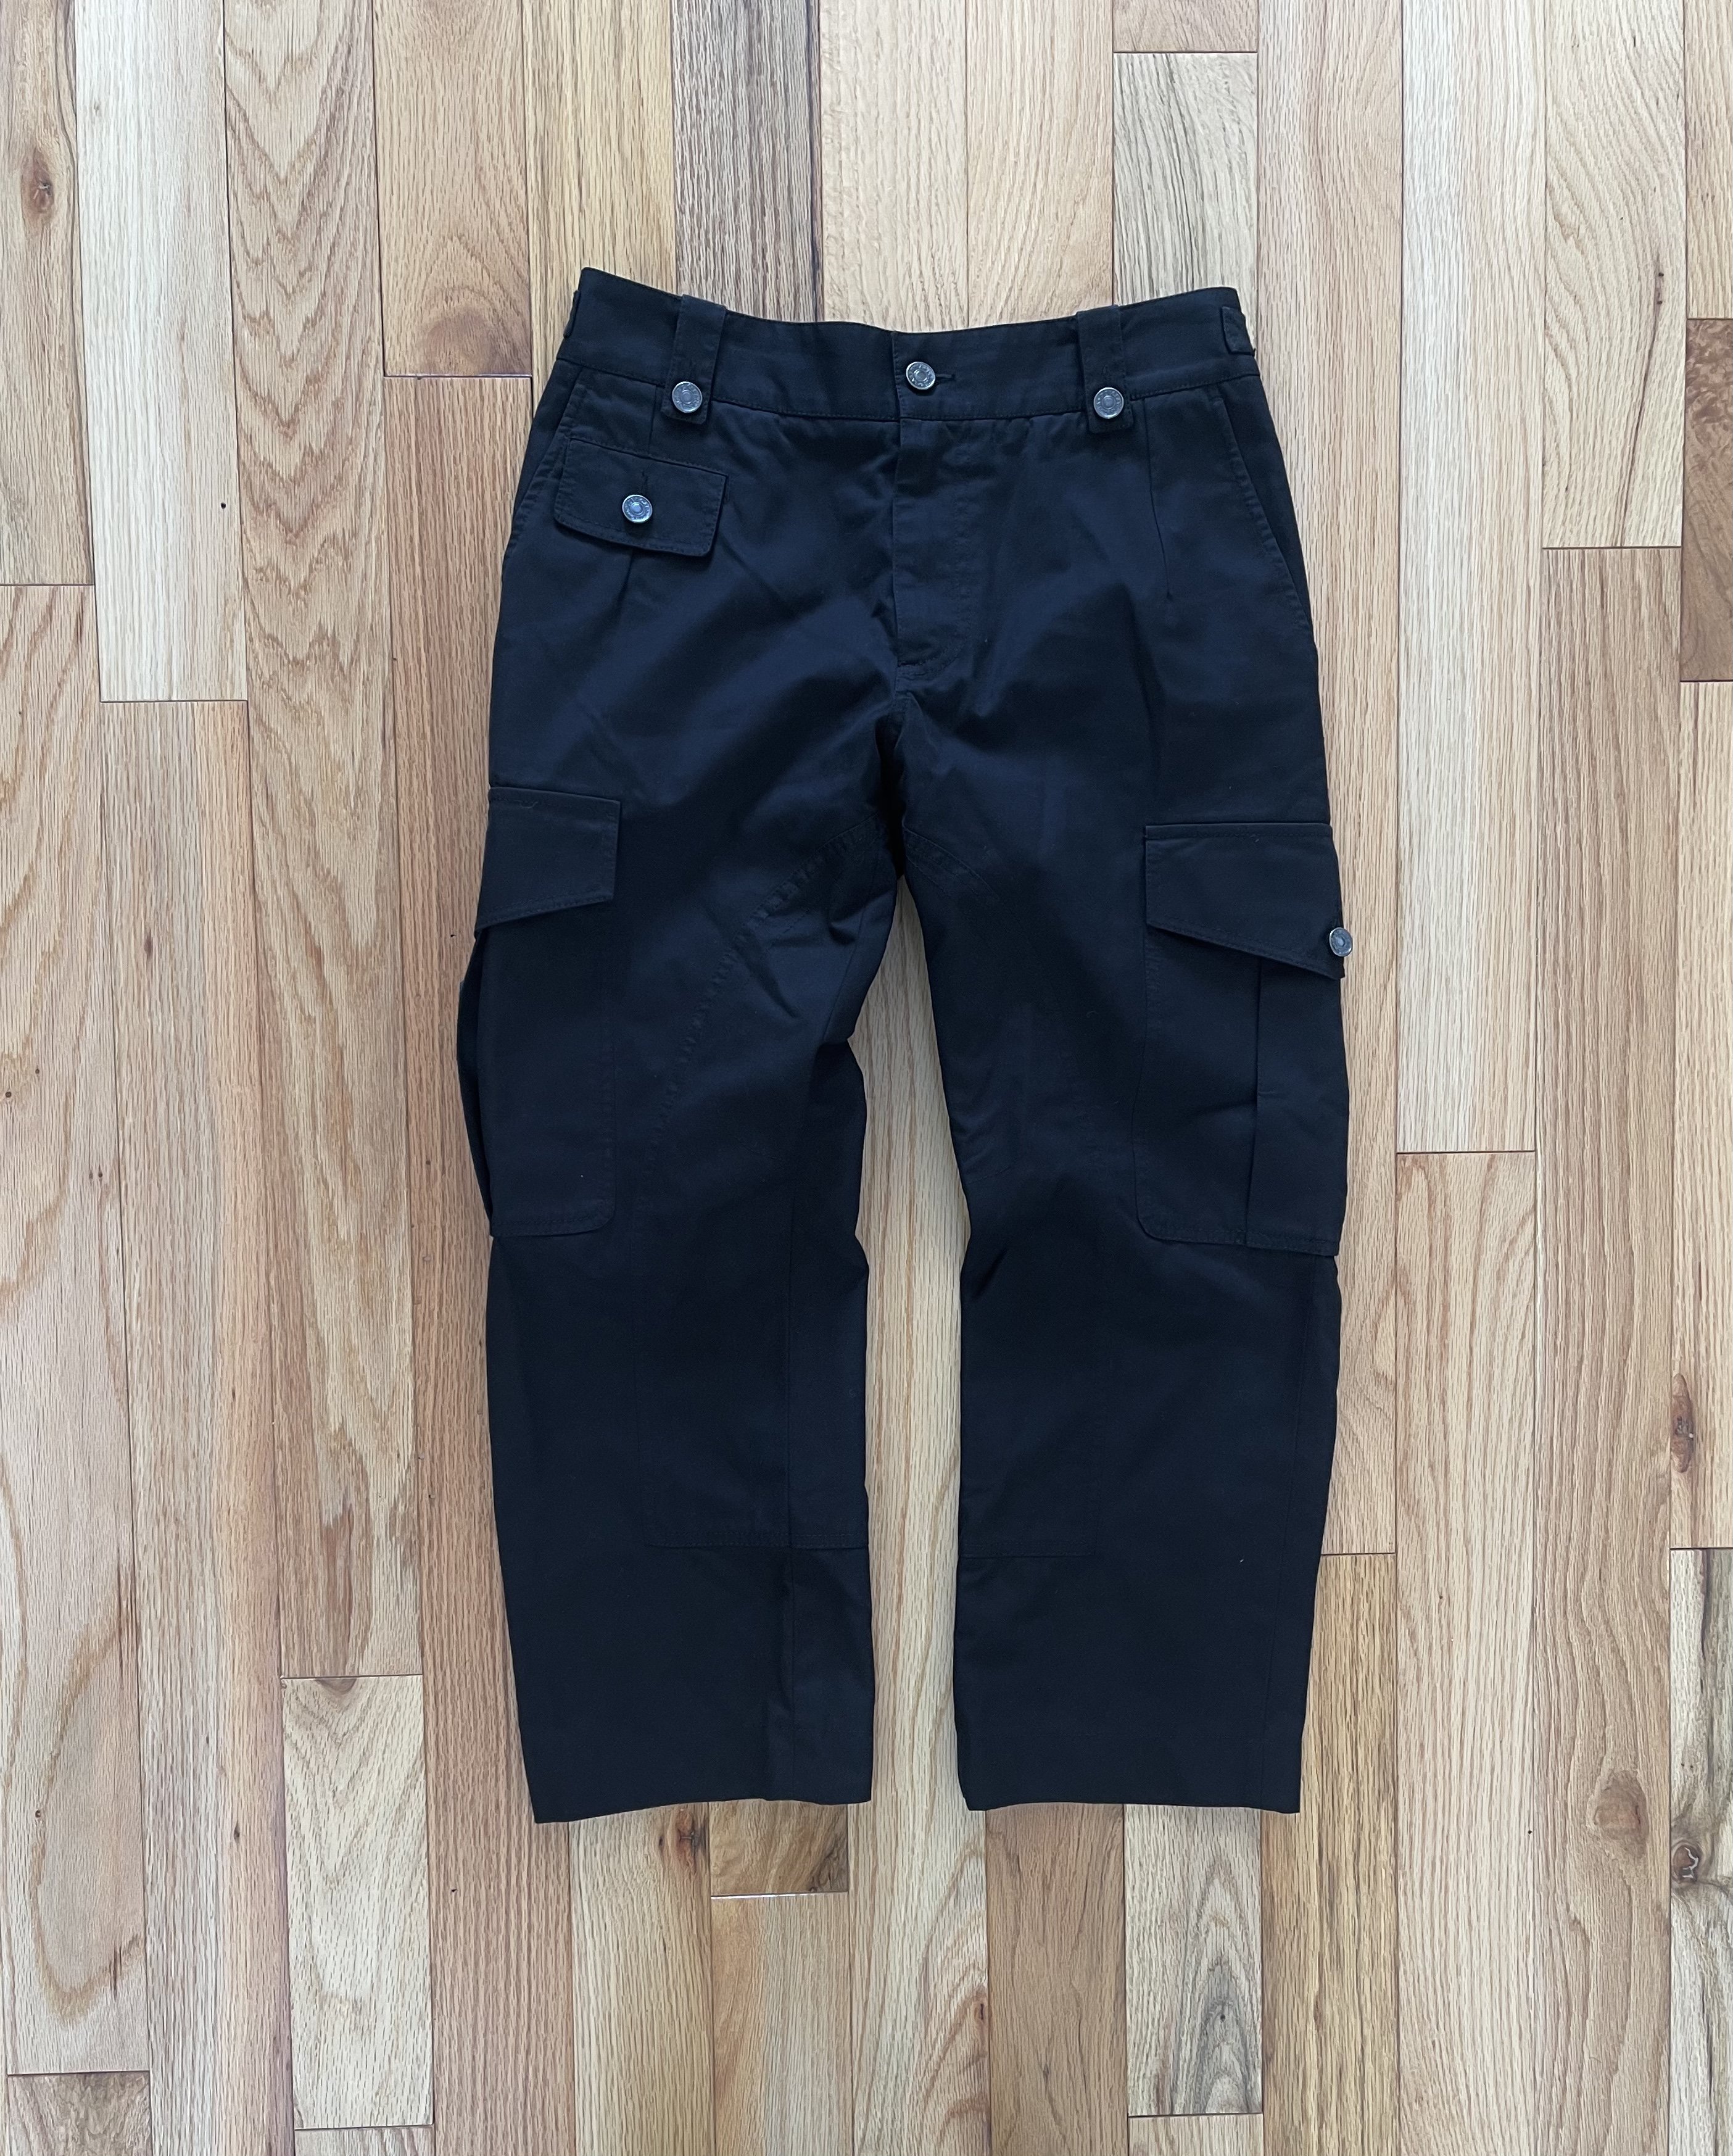 Dolce & Gabbana Black Cropped Cargo Pants | Reissue: Buy & Sell ...